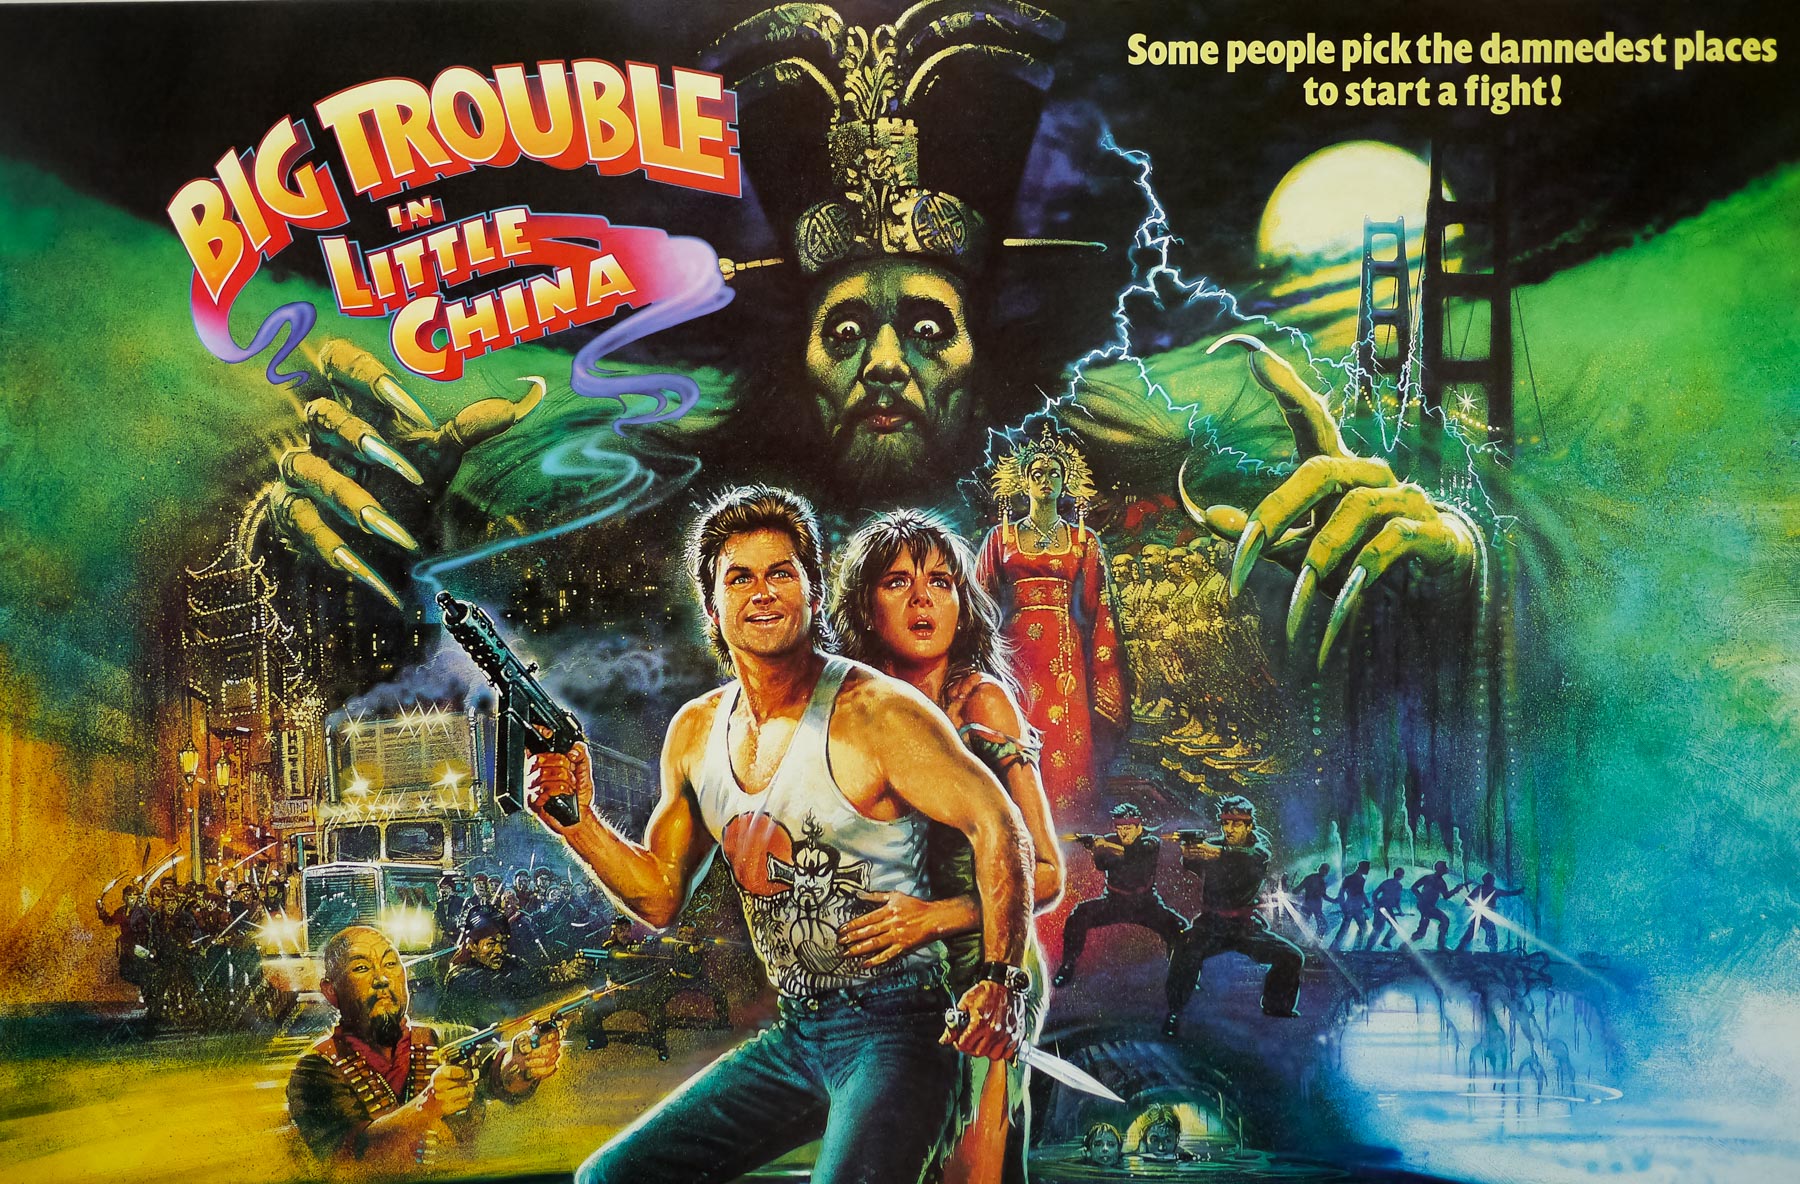 BIG TROUBLE IN LITTLE CHINA repro UK CINEMA QUAD POSTER 30"X40" A1 A2 A3 SIZE 